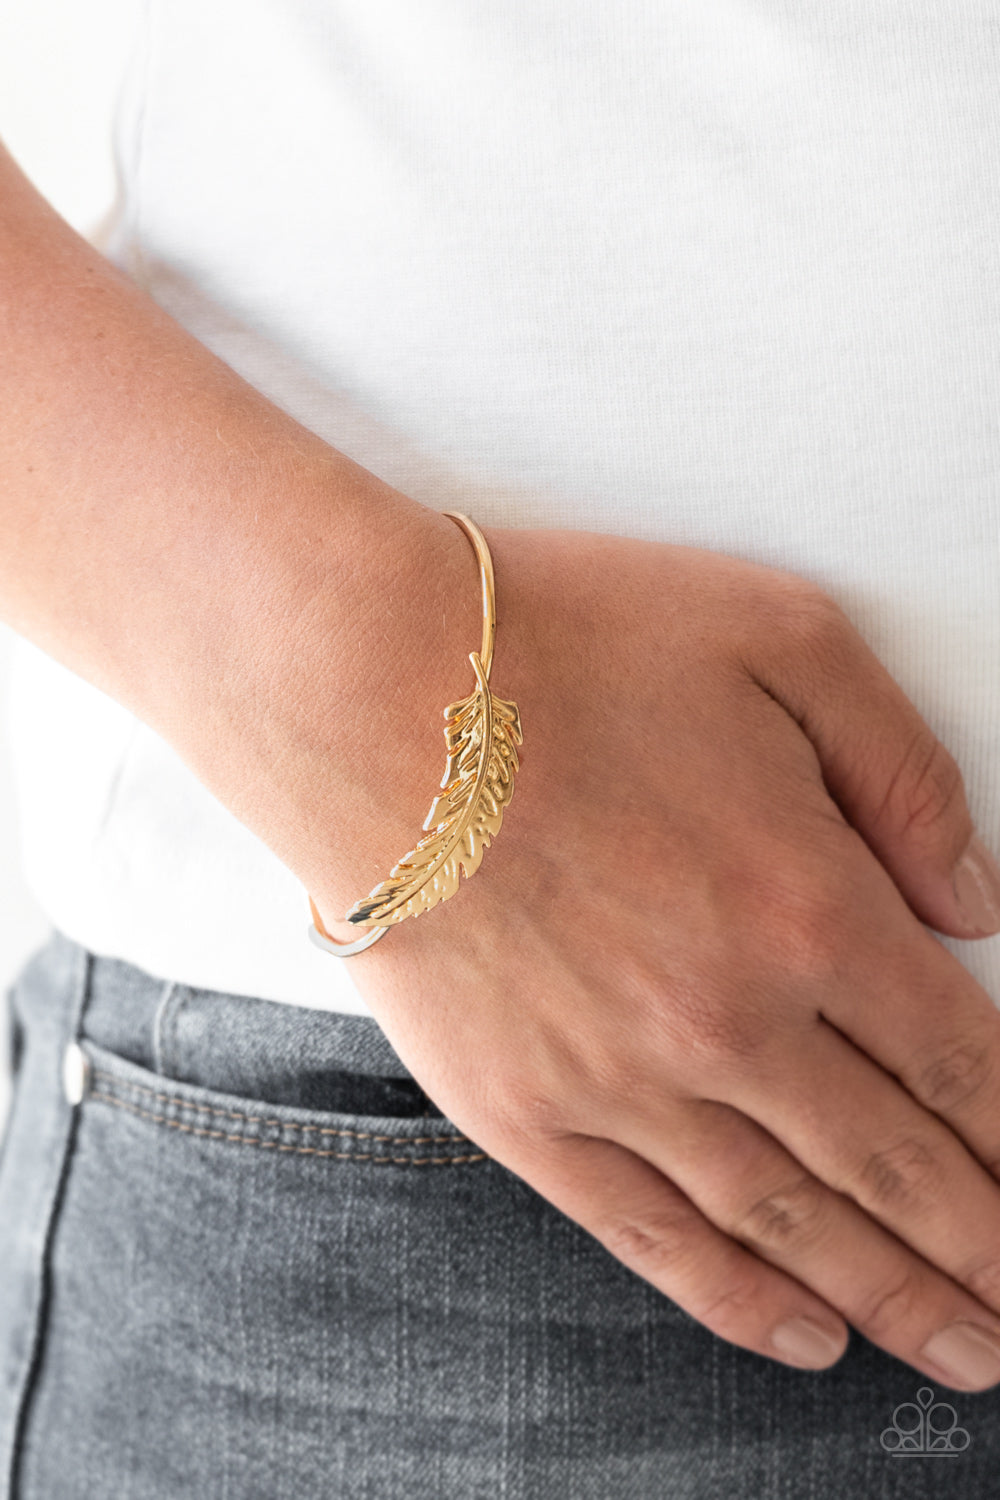 How Do You Like This FEATHER? - Gold Paparazzi Jewelry